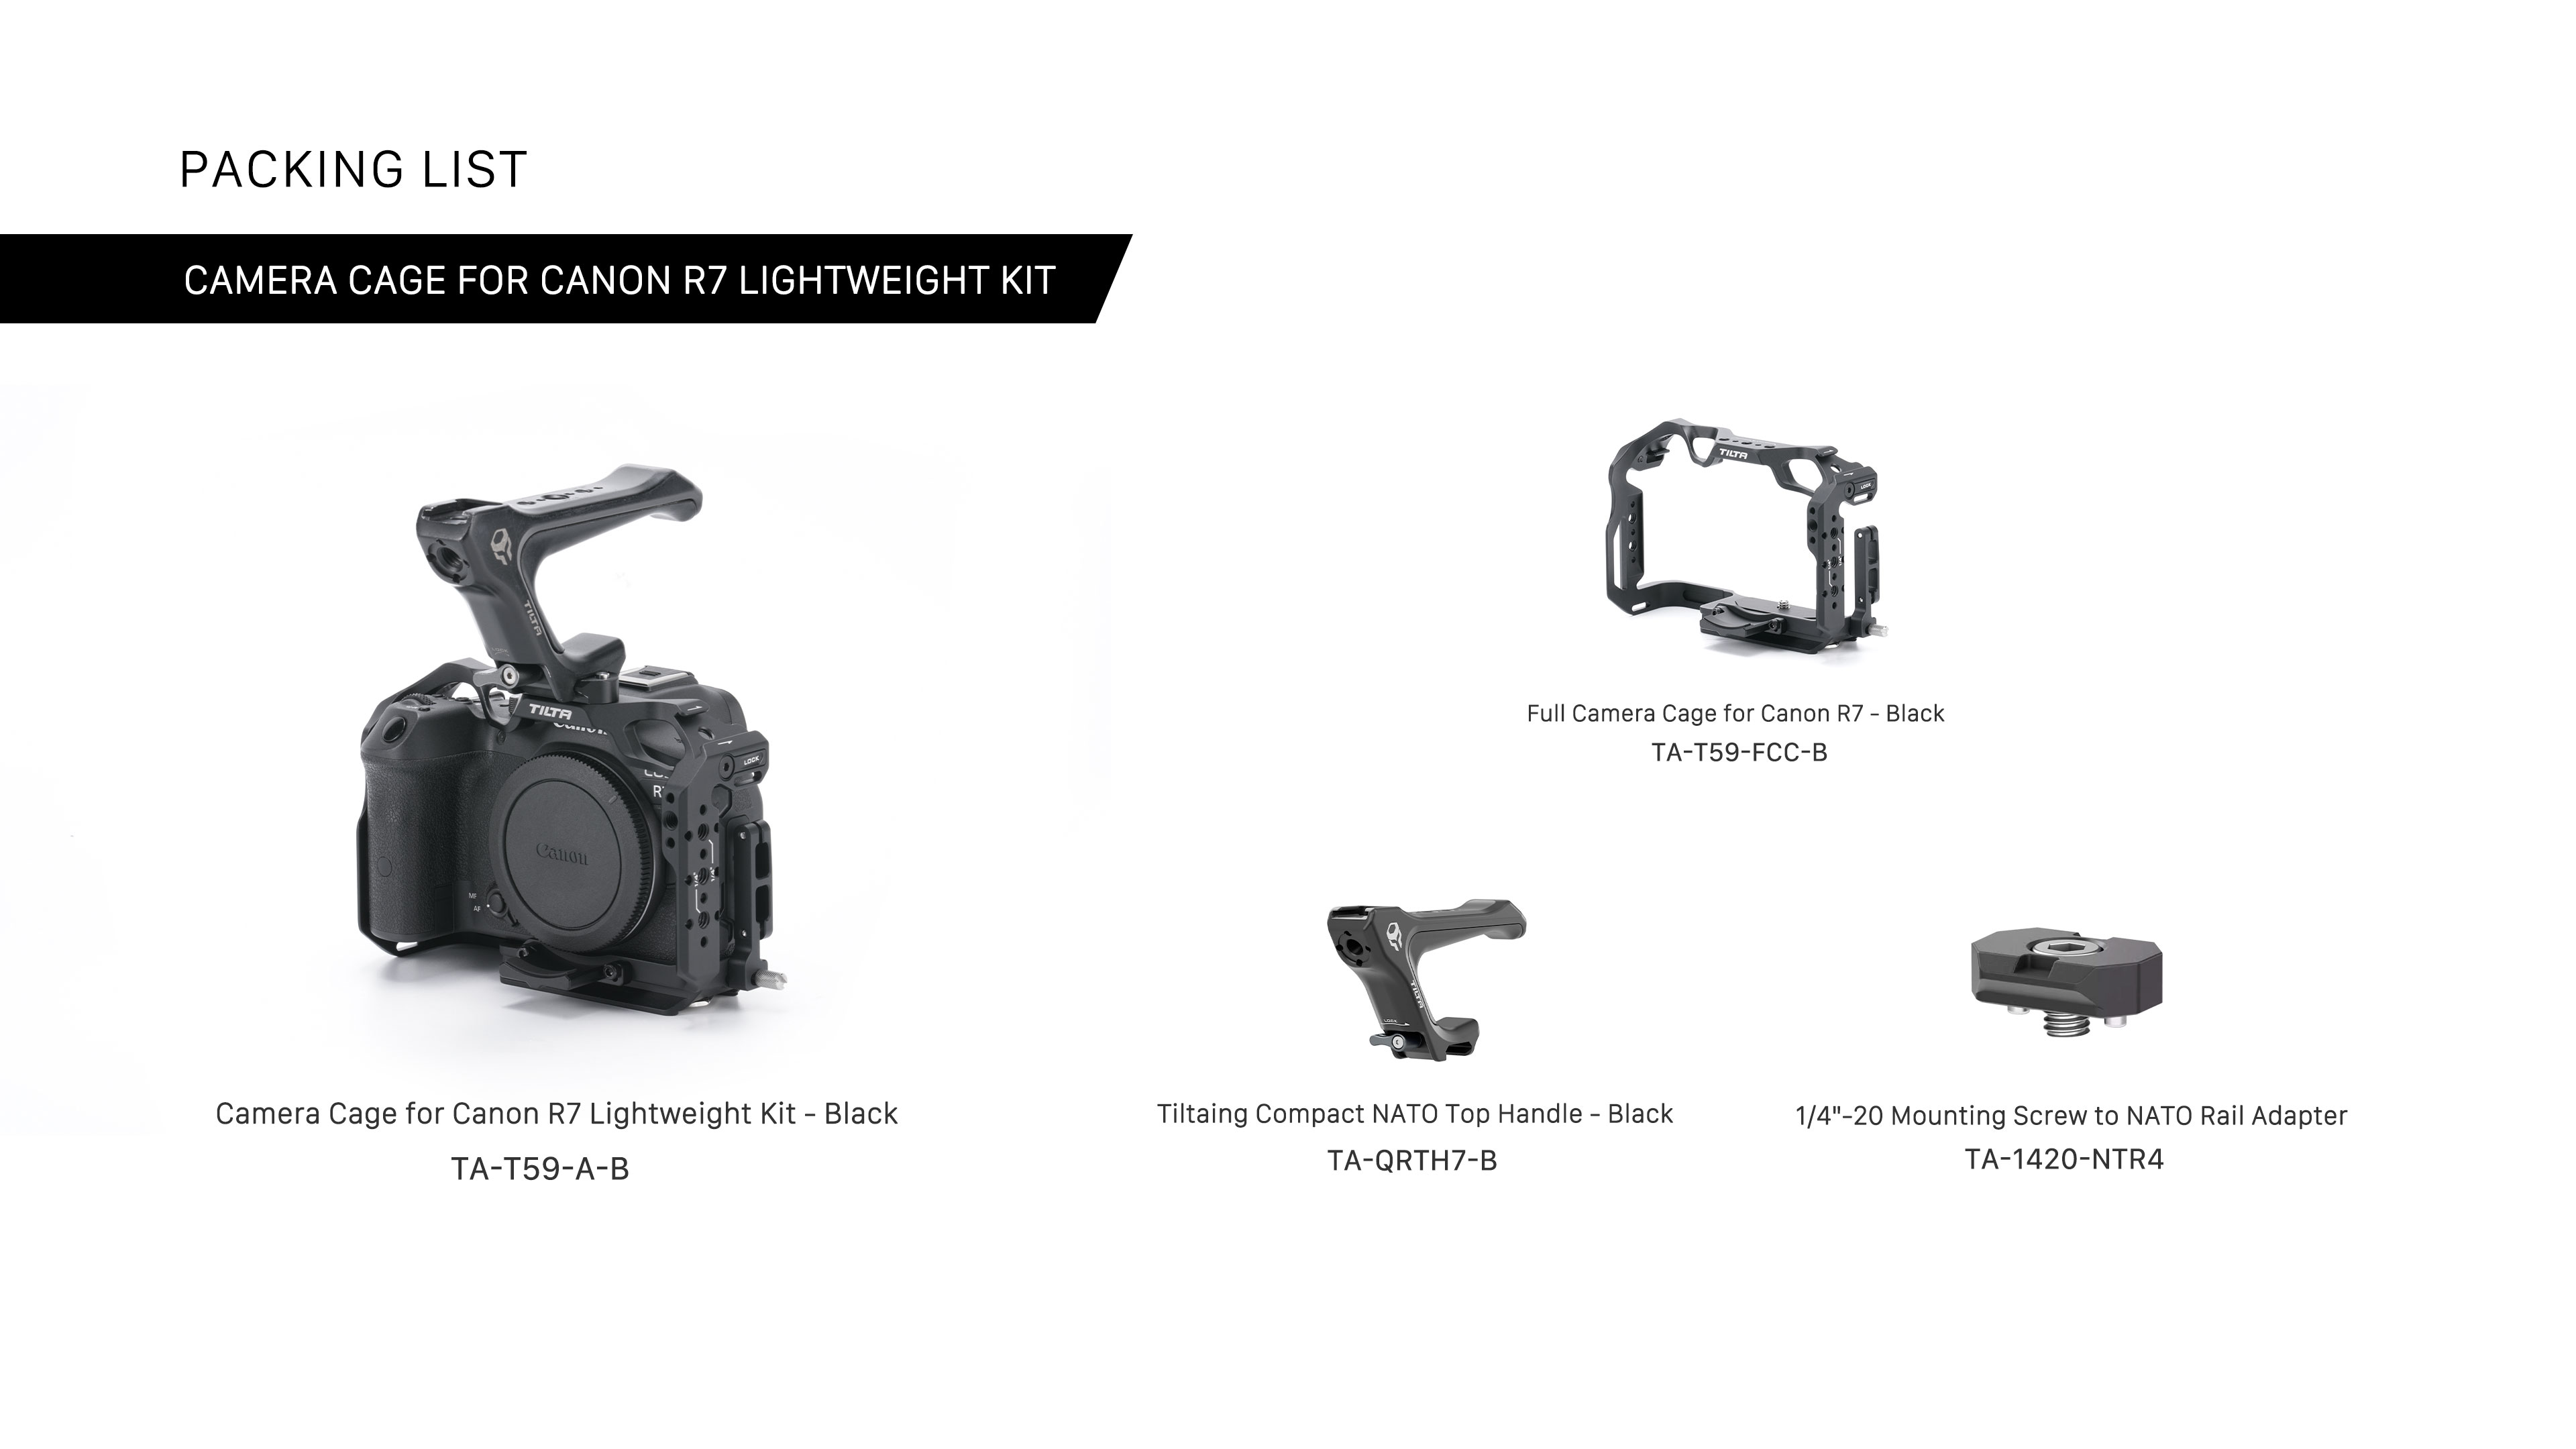 Camera Cage for Canon R7  Lightweight Kit - Black